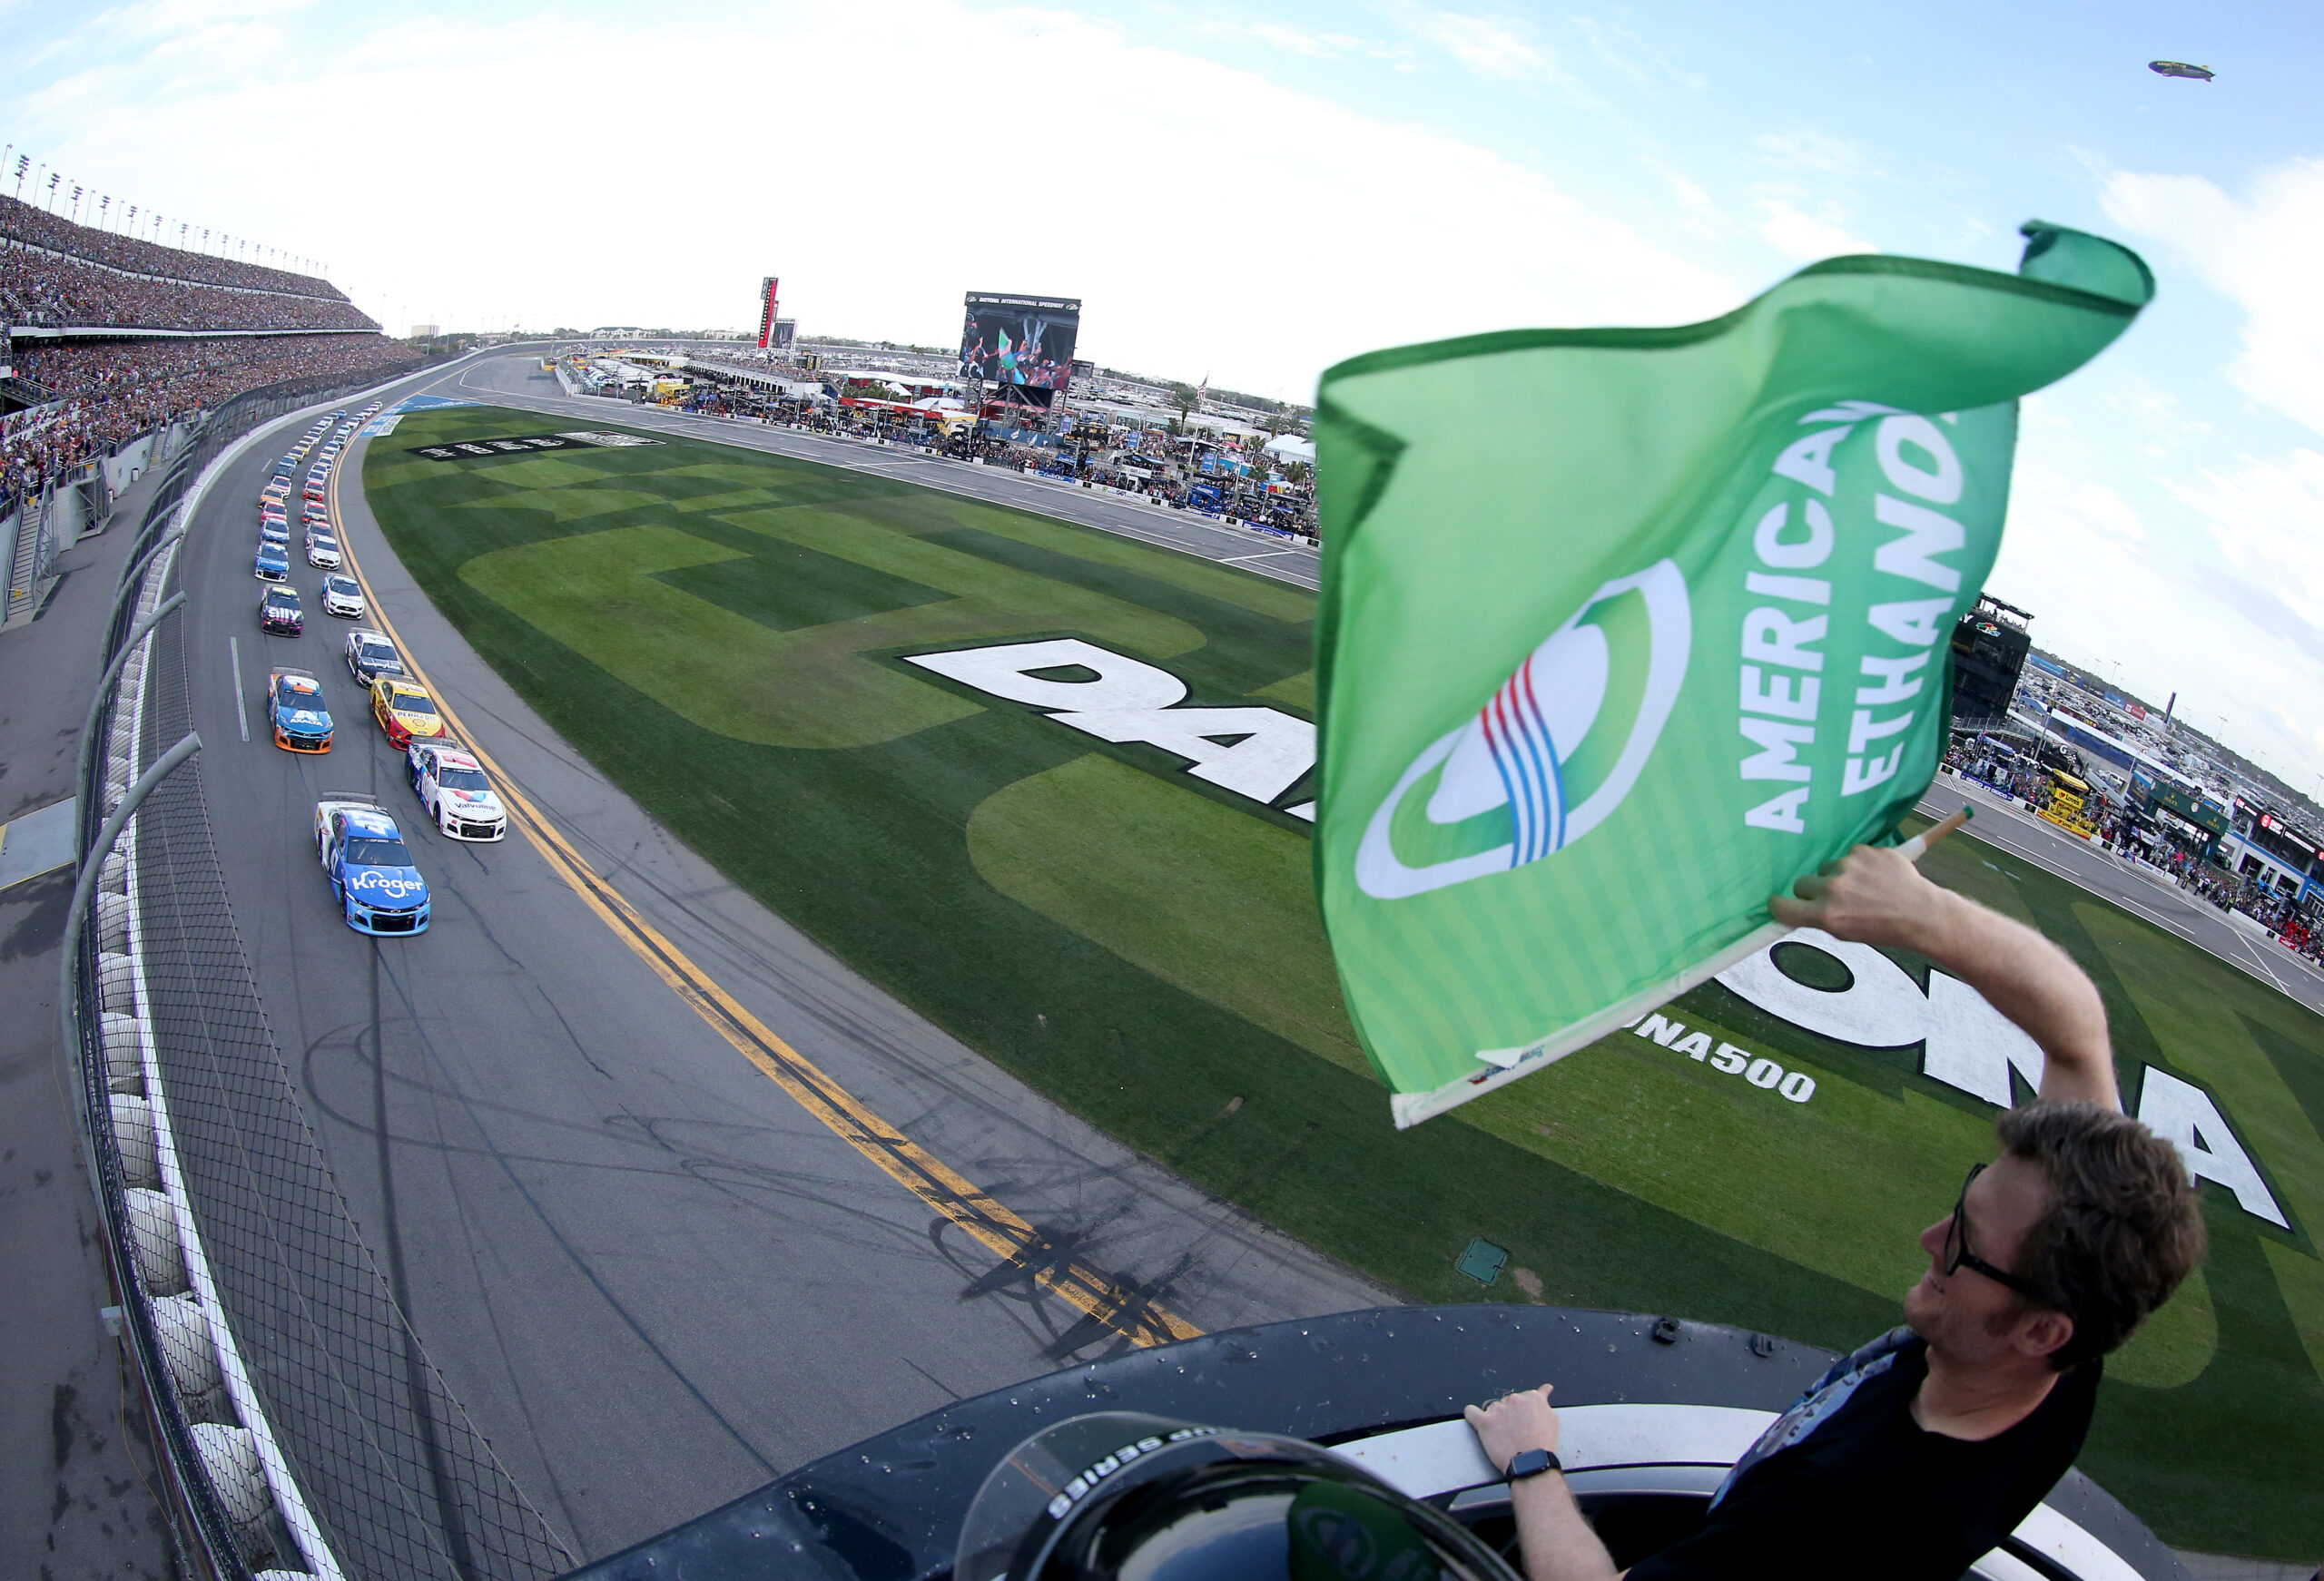 Dale Earnhardt Jr waved the green flag to start the 2020 Daytona 500 and NASCAR Cup Series season. (Photo Credit: Brian Lawdermilk/Getty Images)